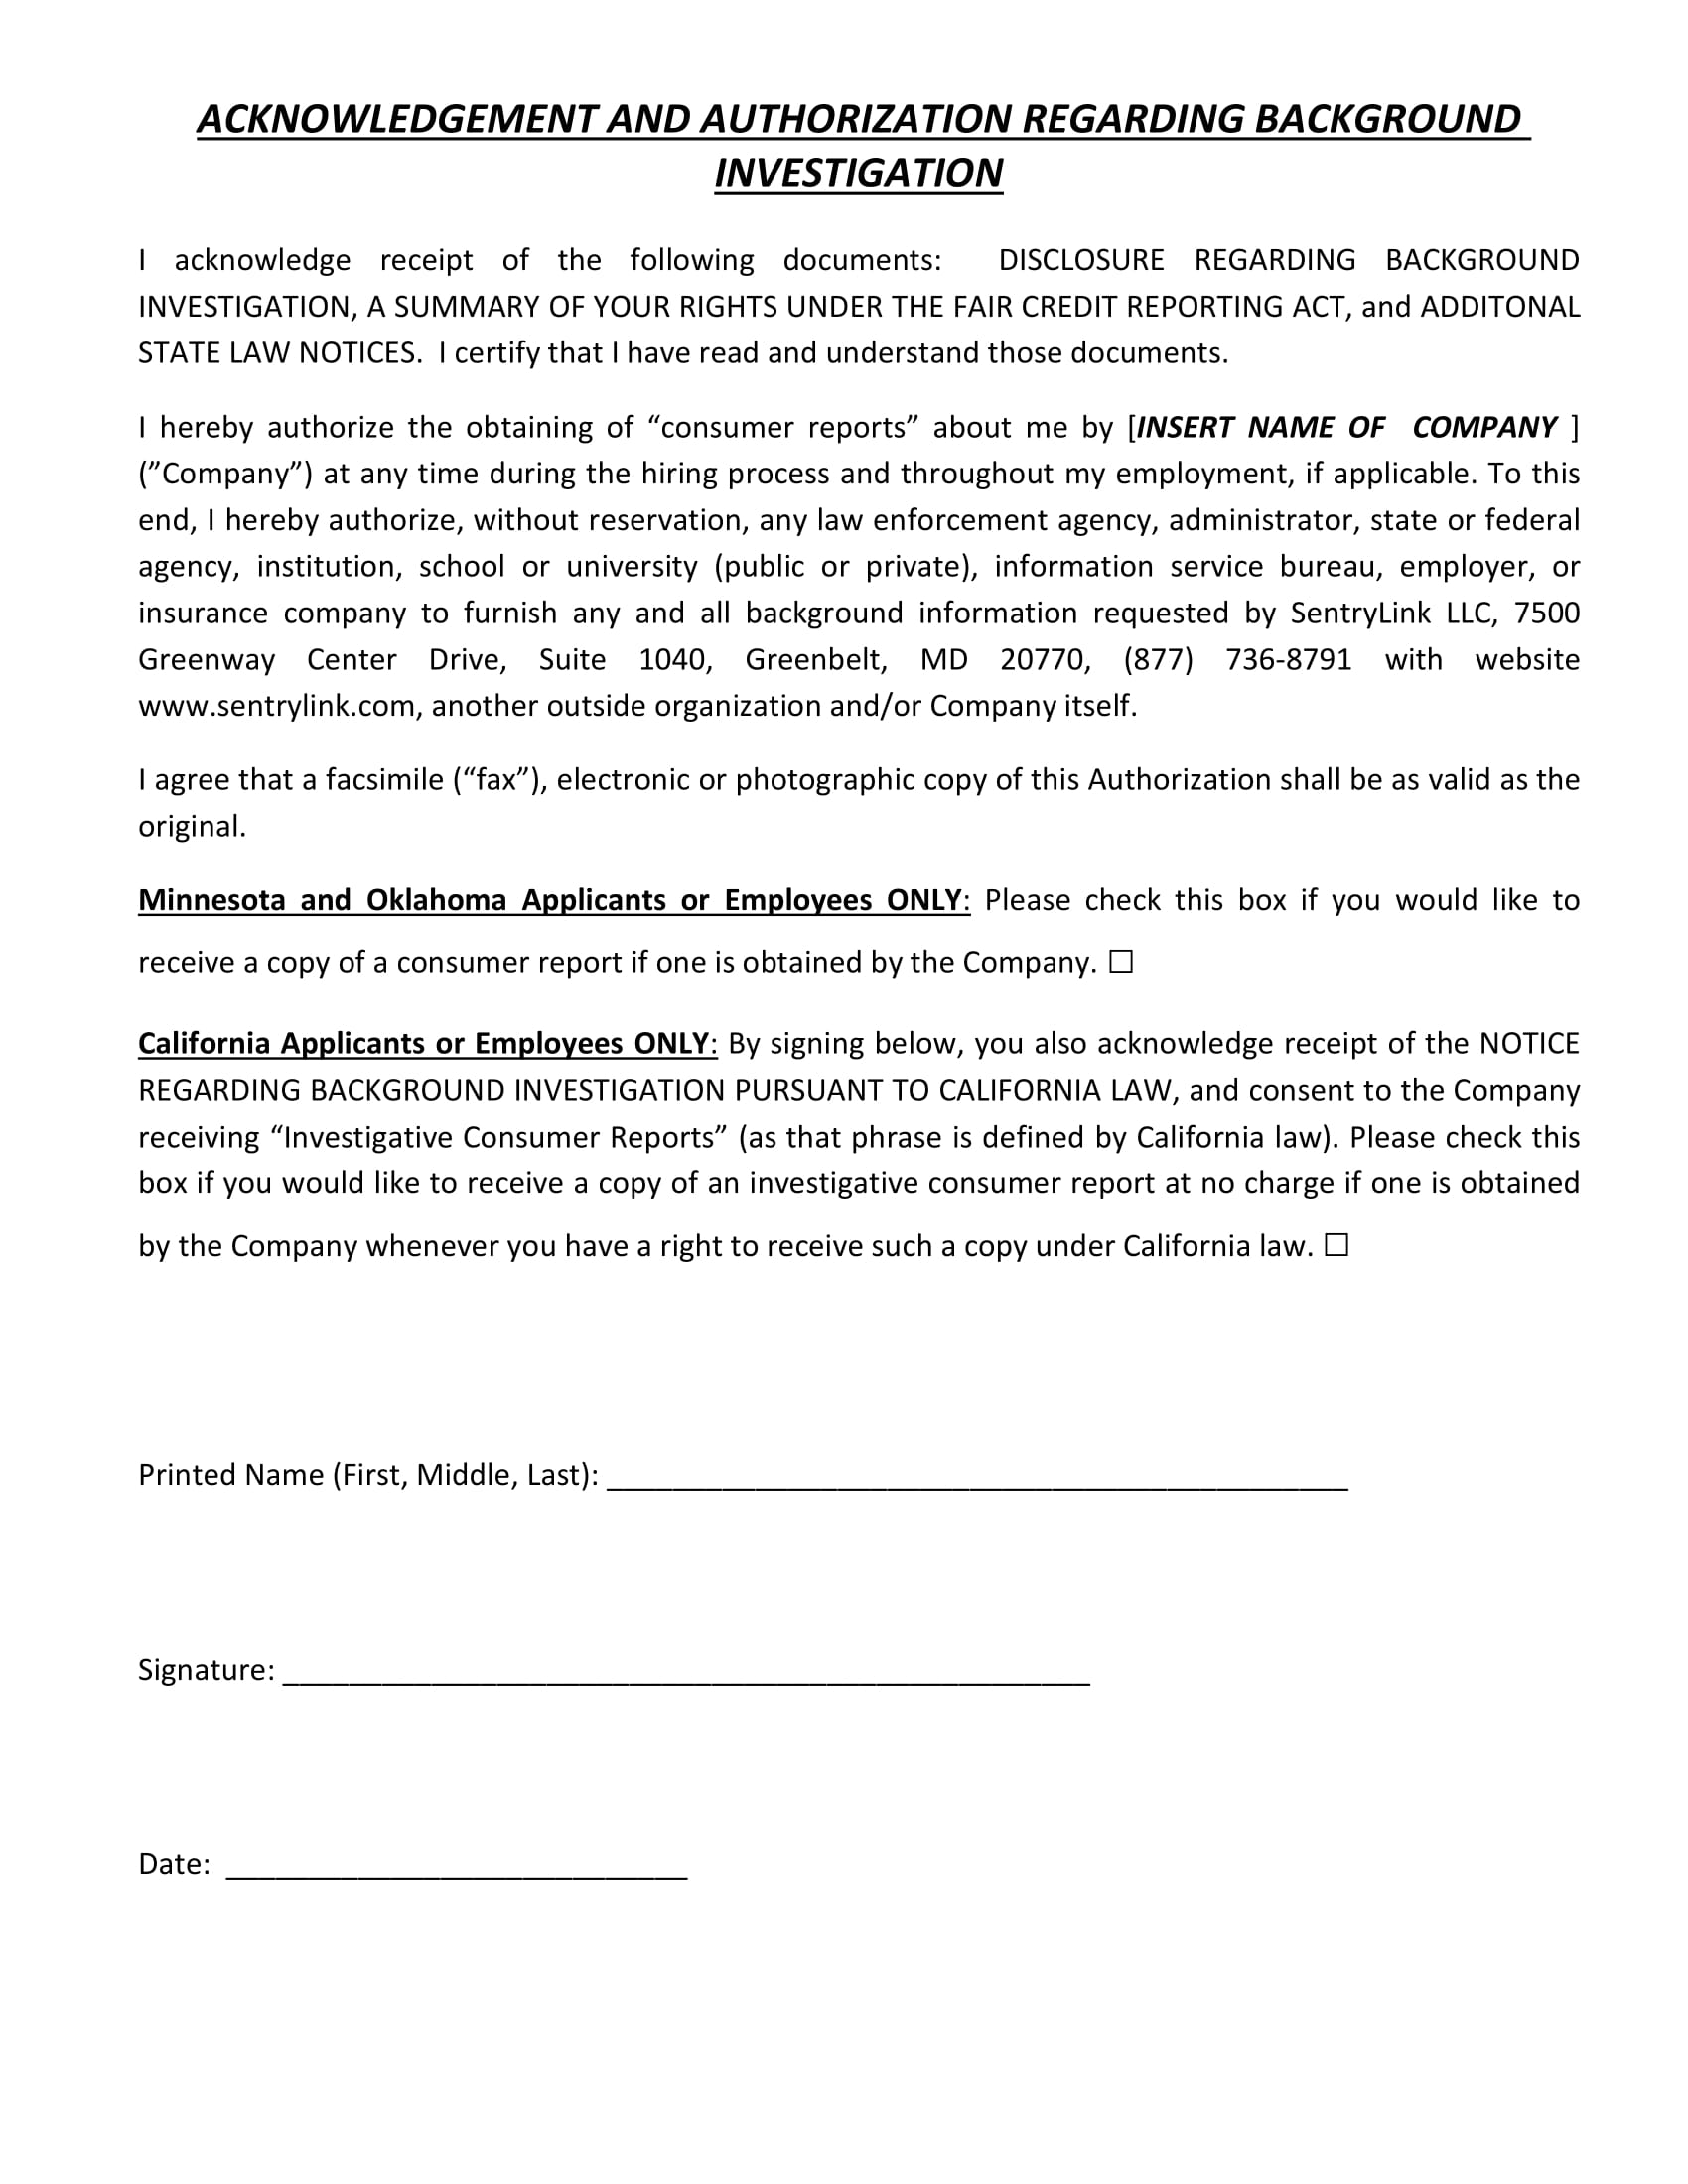 acknowledgment and authorization regarding background investigation form